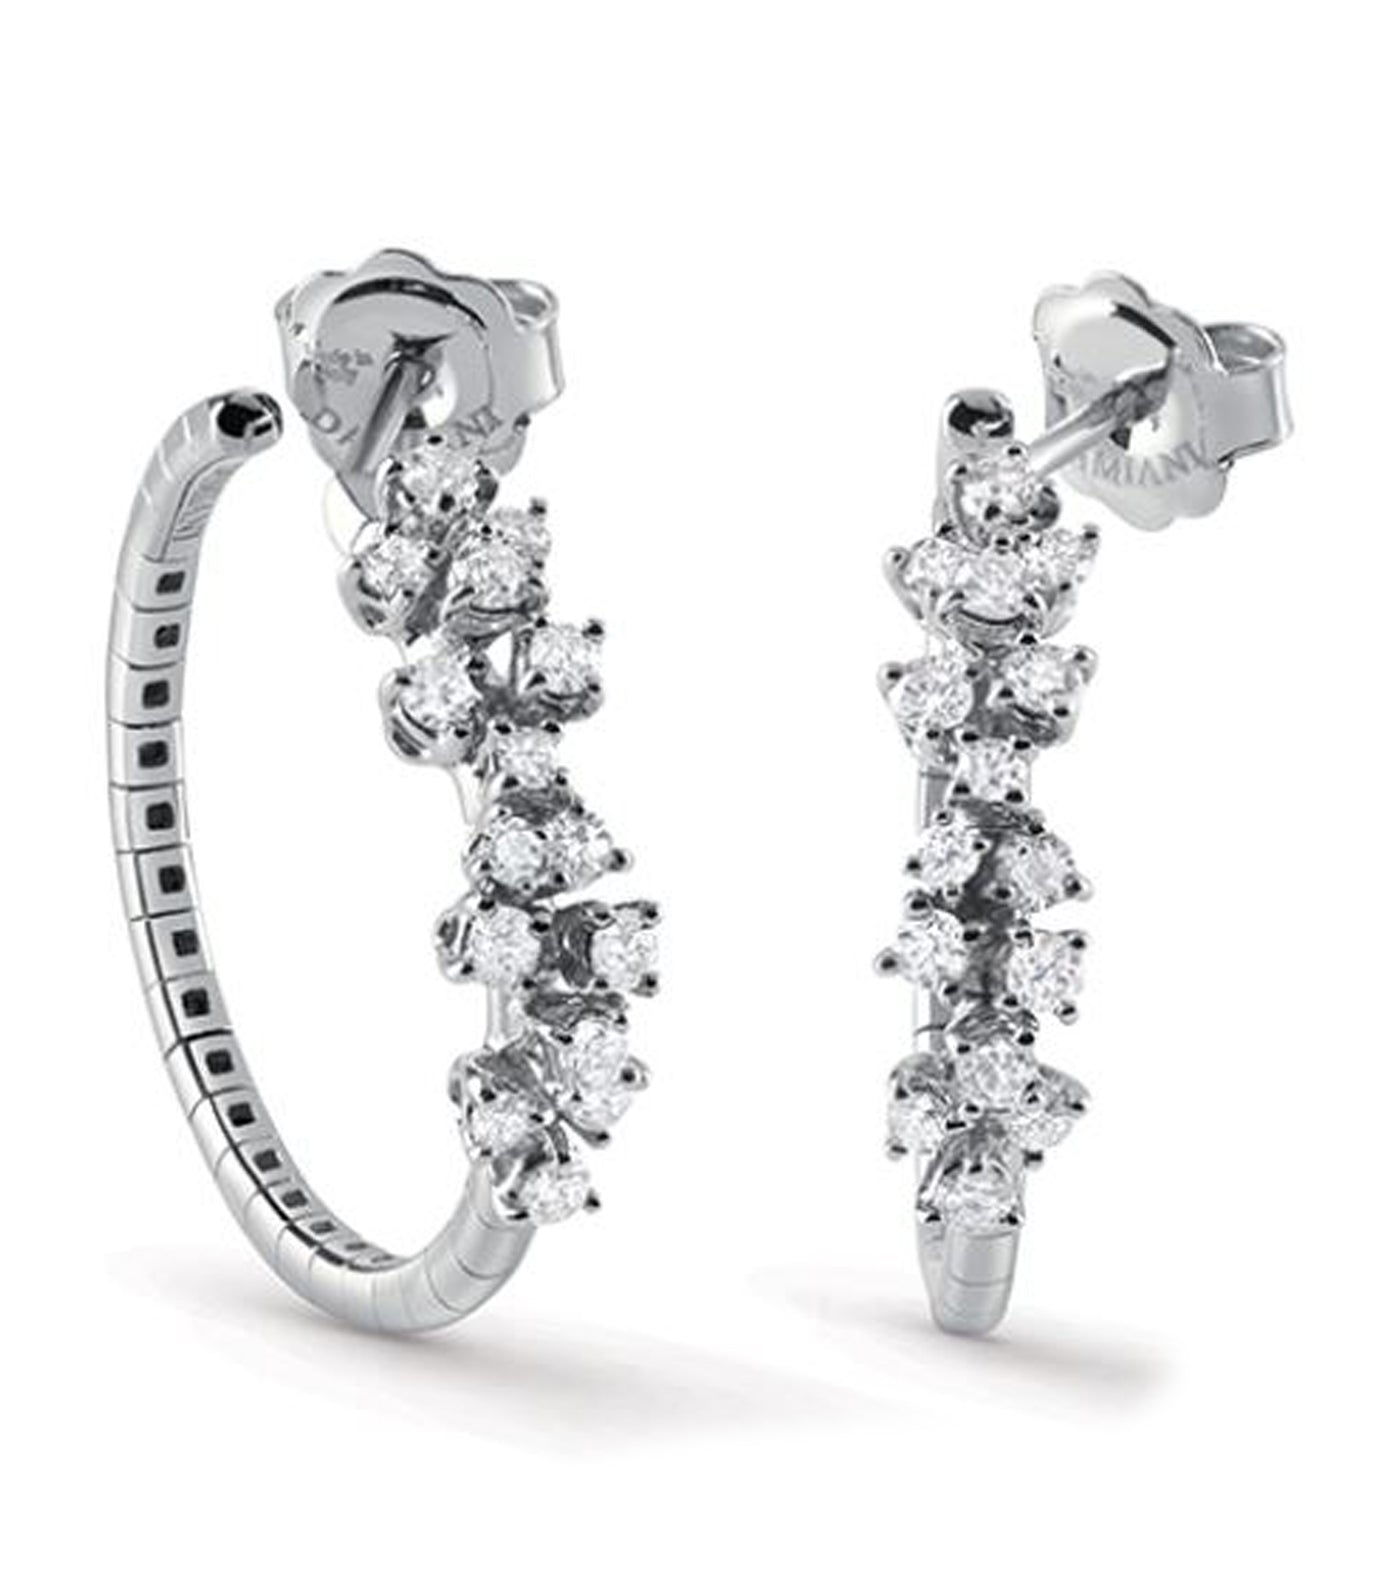 Mimosa Flexi White Gold and Diamonds Earrings 0.70ct